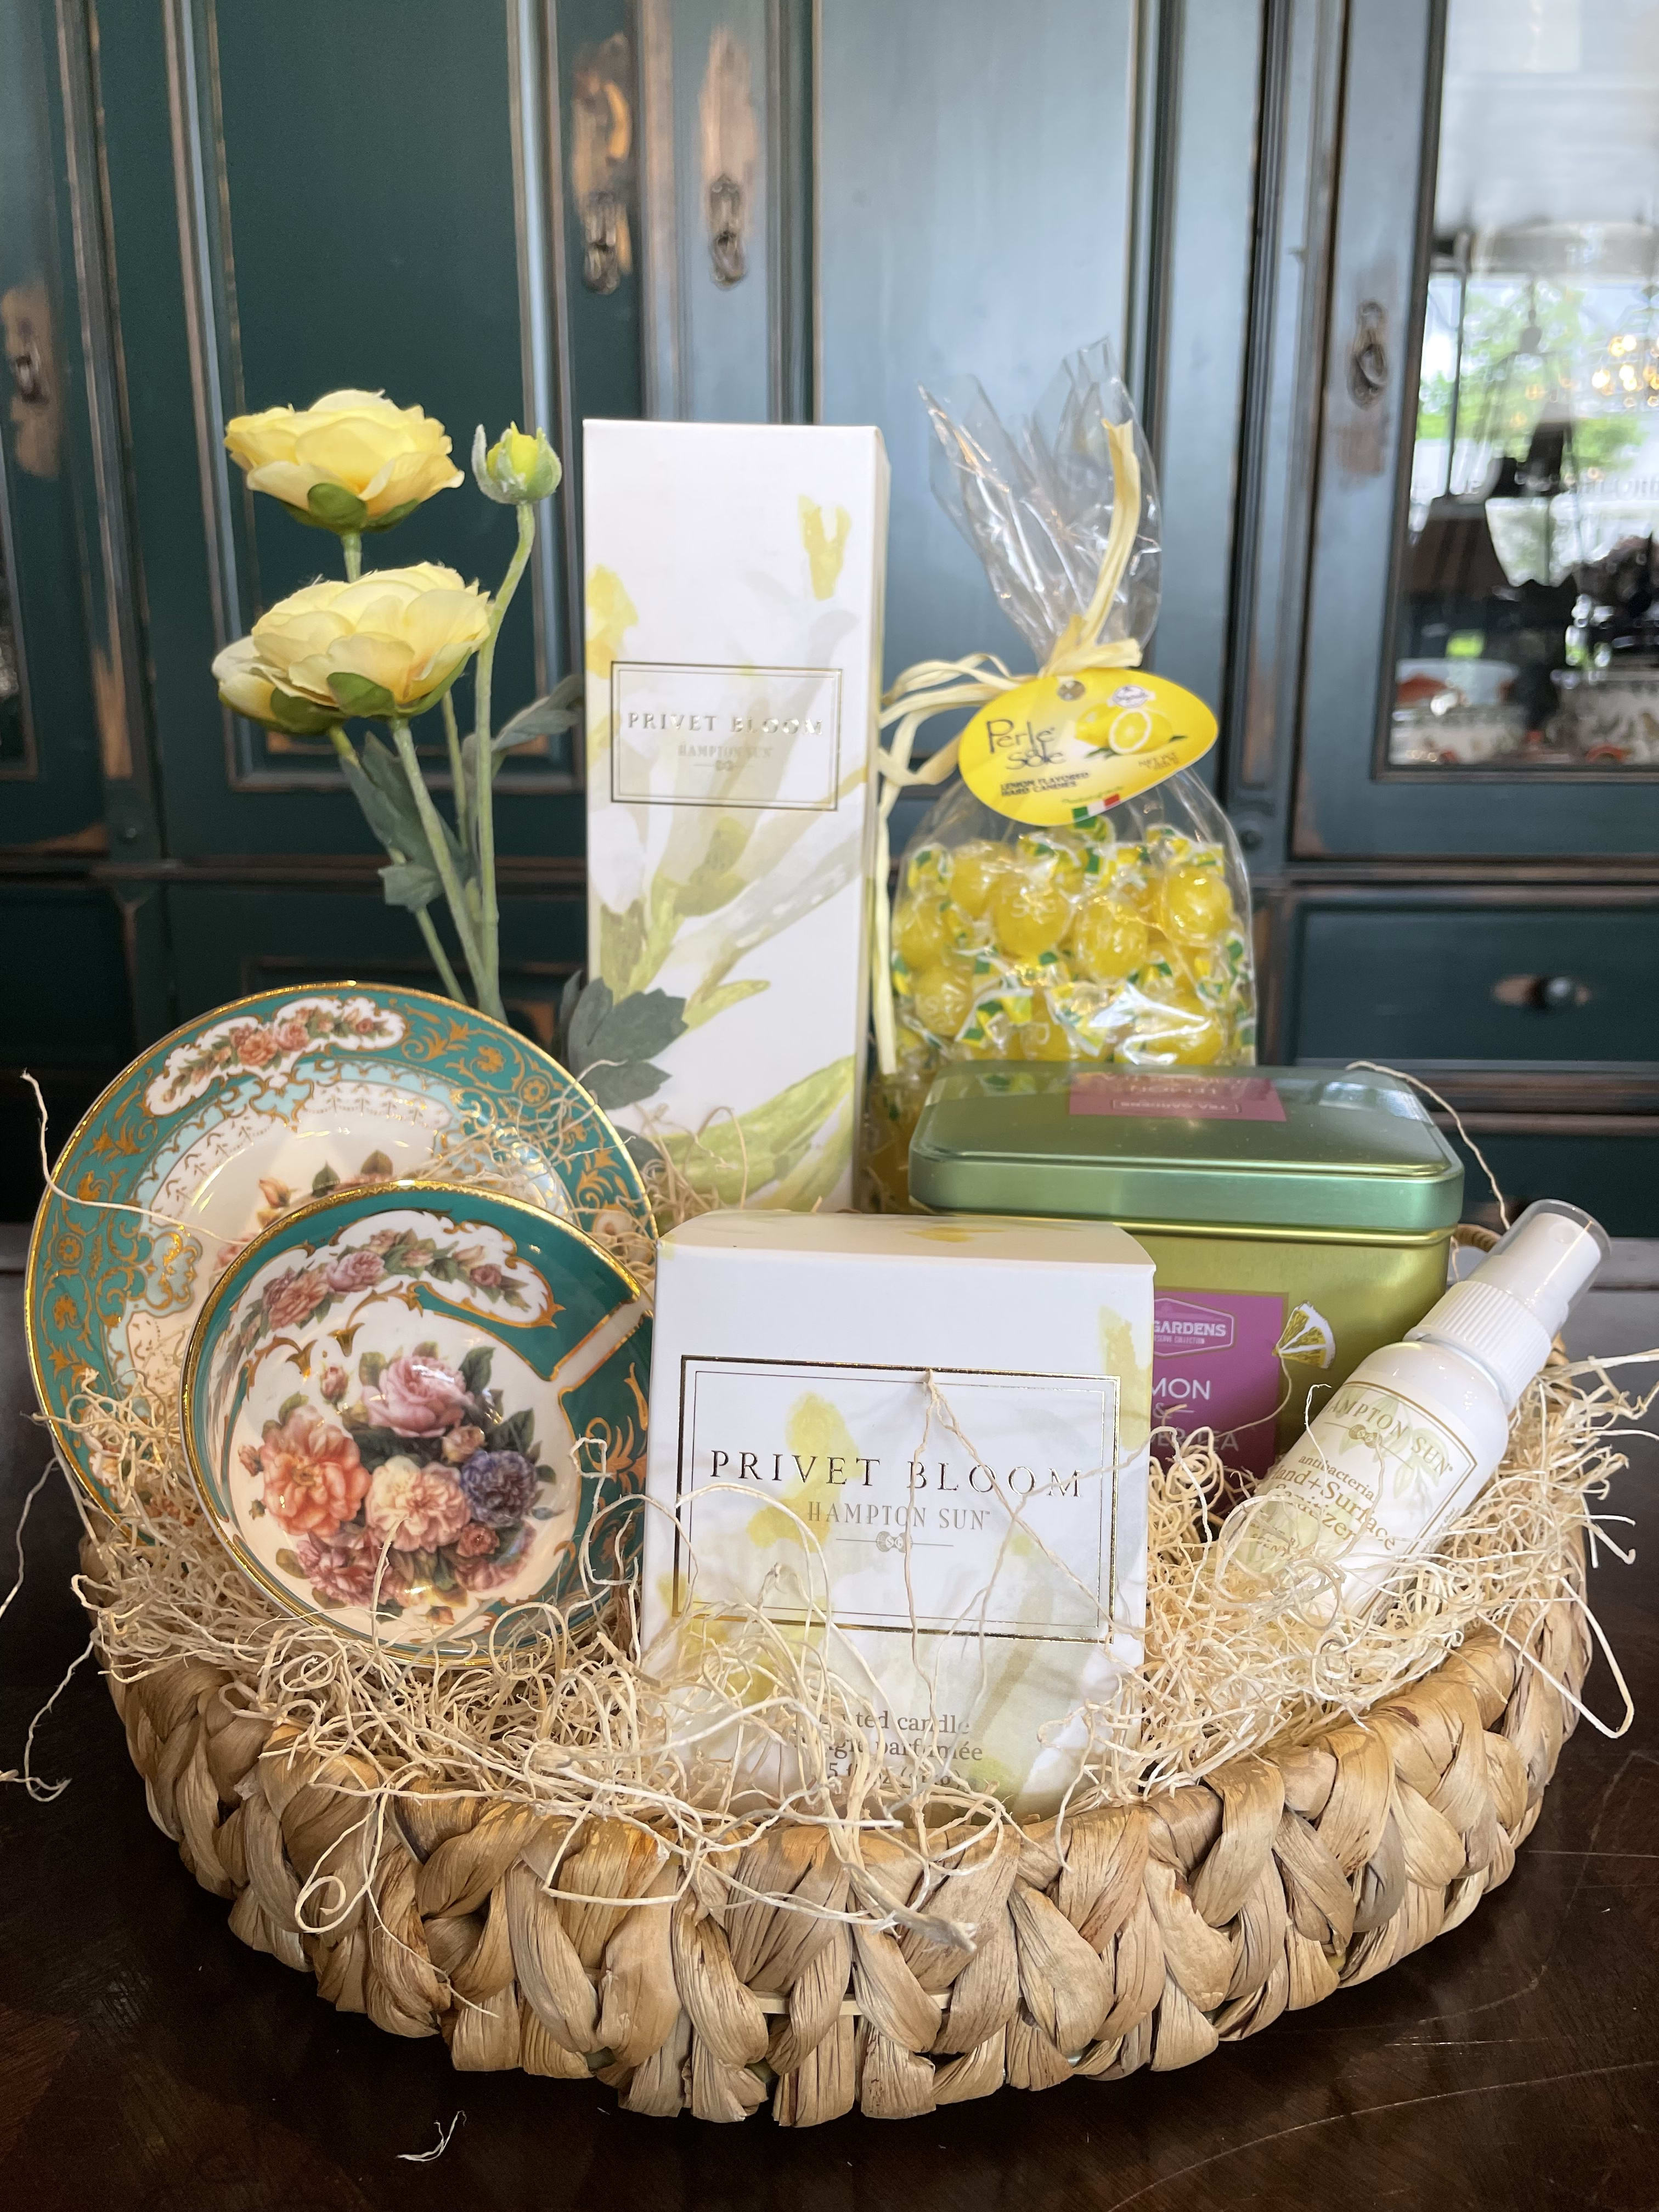  Hampton Sun - Privet Bloom - Mother's Day Basket - Looking for the perfect gift?  Transport yourself to a summer day. This soothing scent of the Hamptons will bring you there, no matter the time, day or place.  Within this beautiful basket is 6.8 fl oz Privet Bloom Diffuser, Privet Bloom Scented Candle, Hampton Sun antibacterial Hand + Surface Sanitizer, Old world elegant ceramic teacup &amp; saucer, Perle di Sole-limon flavored hard candies. The sea grass basket is decorated with small silk high-end flower bouquet. The gift basket is complimented with a greeting card. (Gift items &amp; color may vary)  